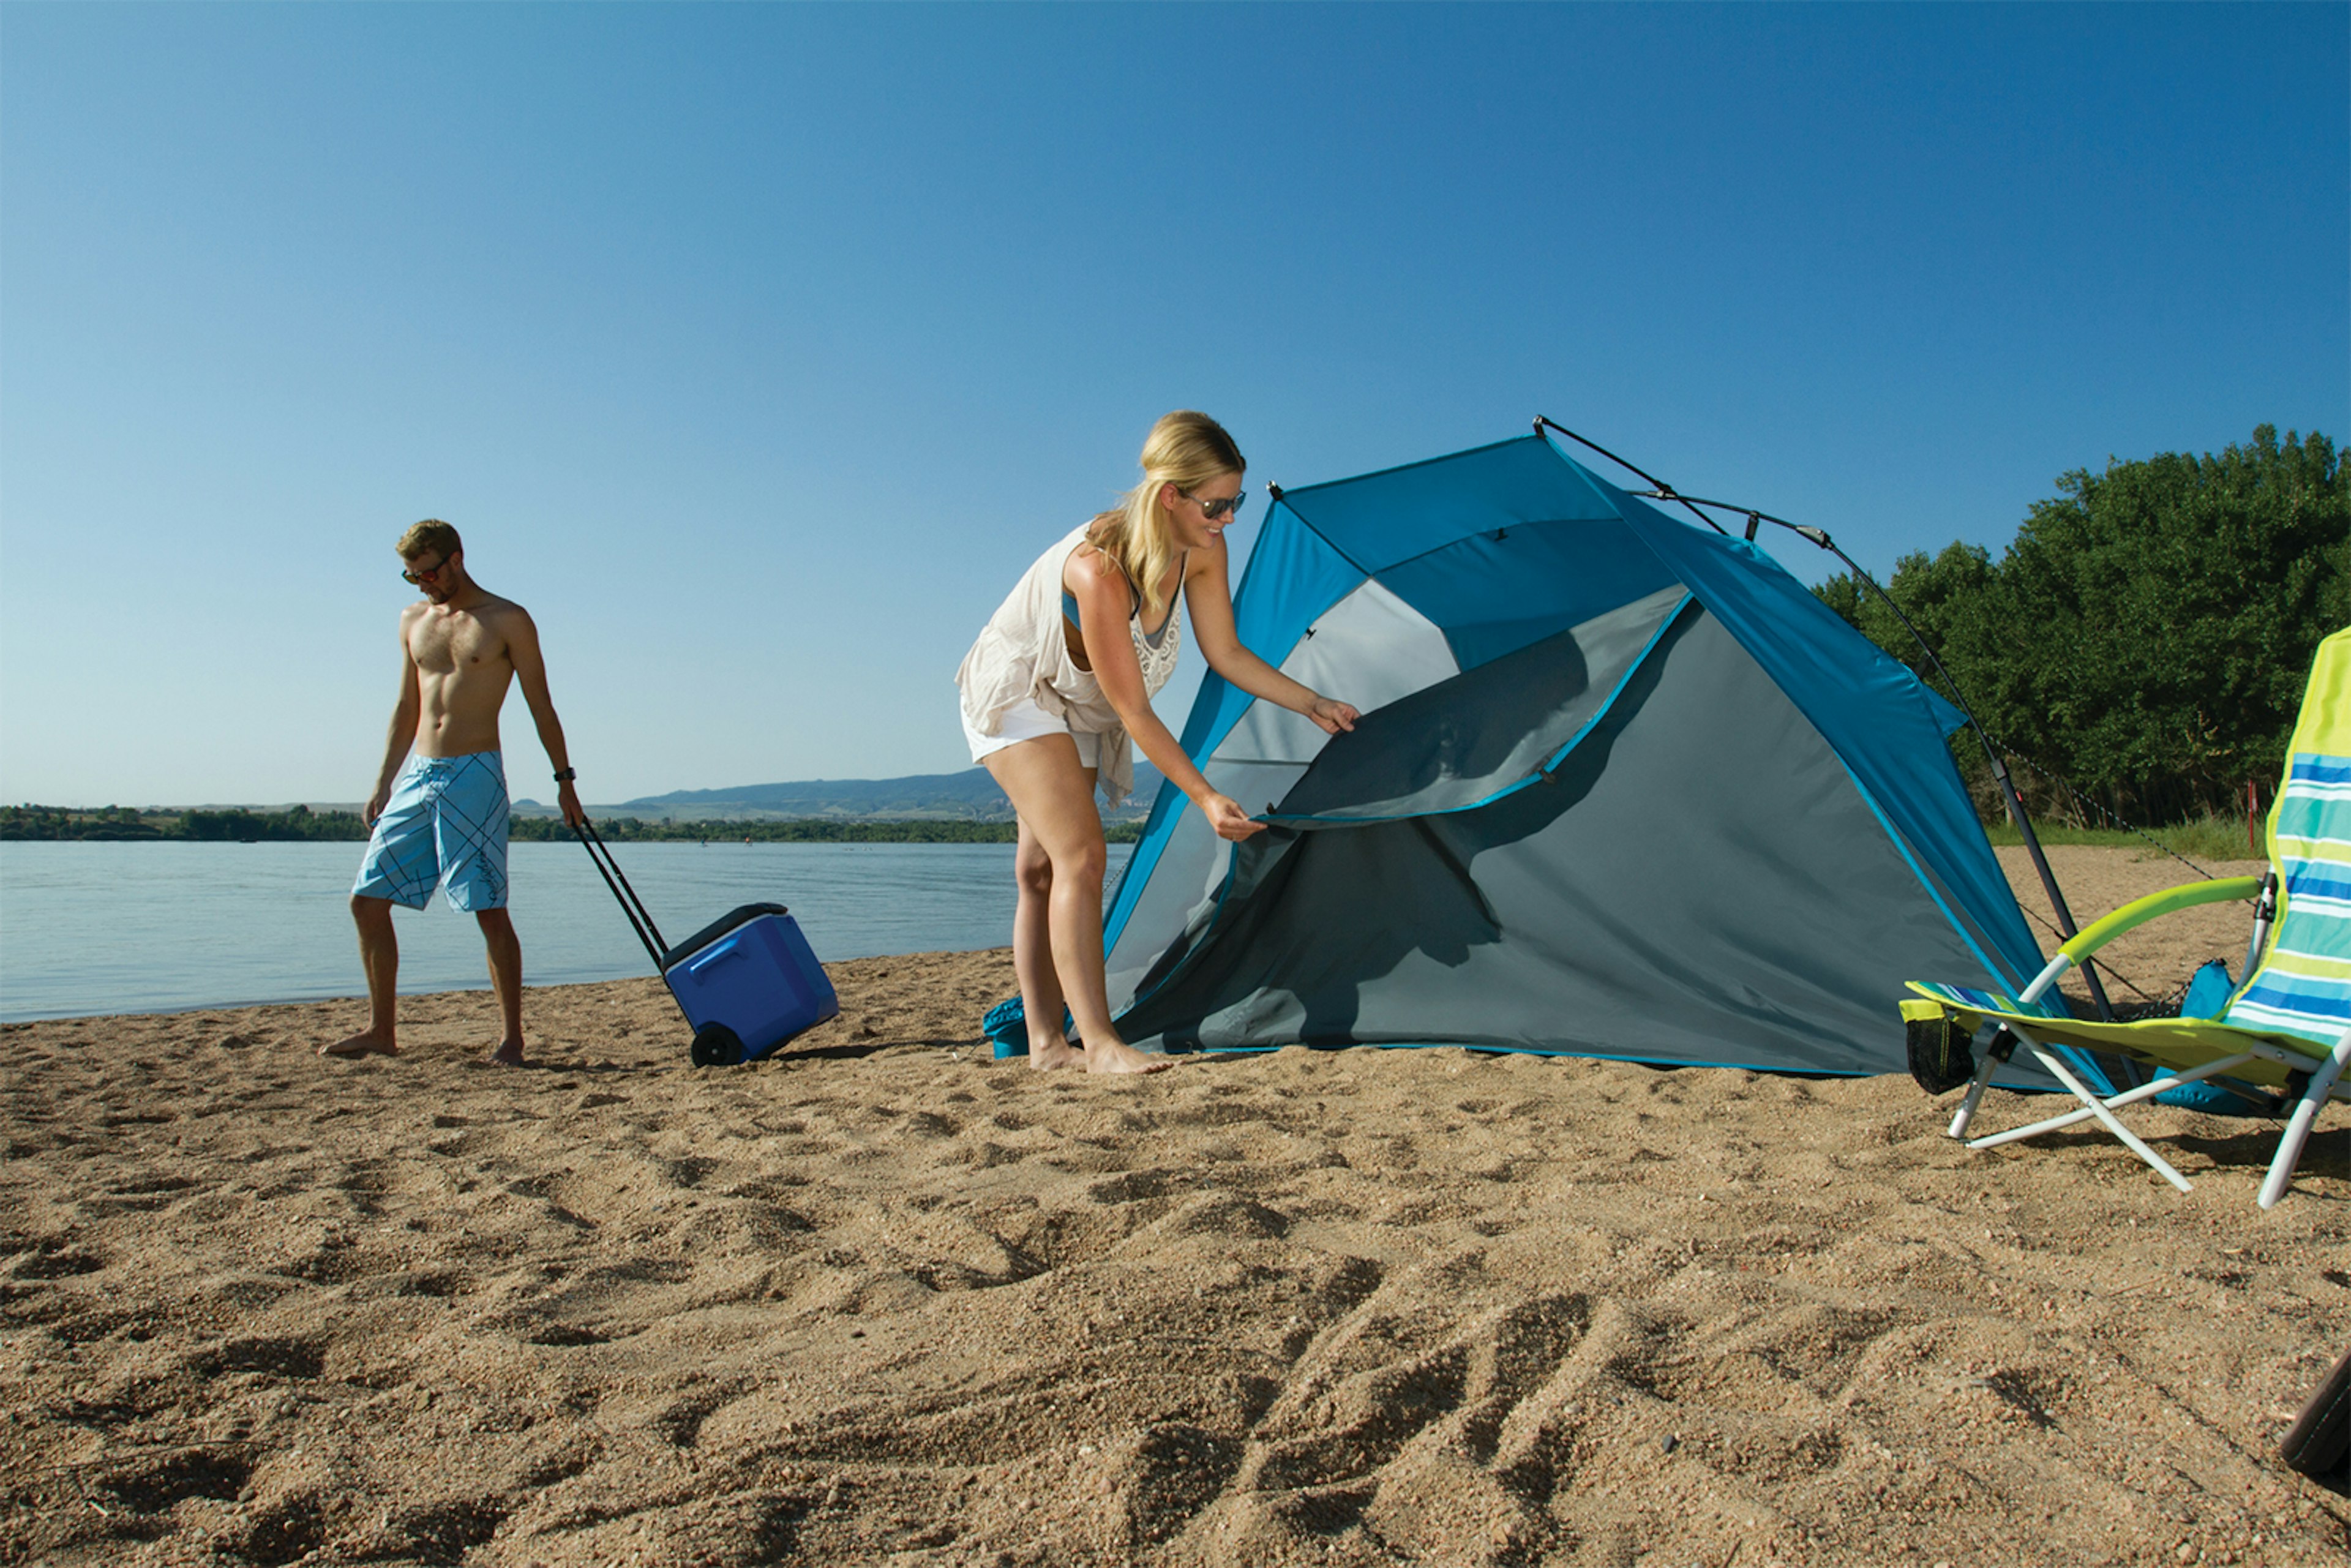 A woman erects a tent on a beach while a shirtless man poses with a cooler